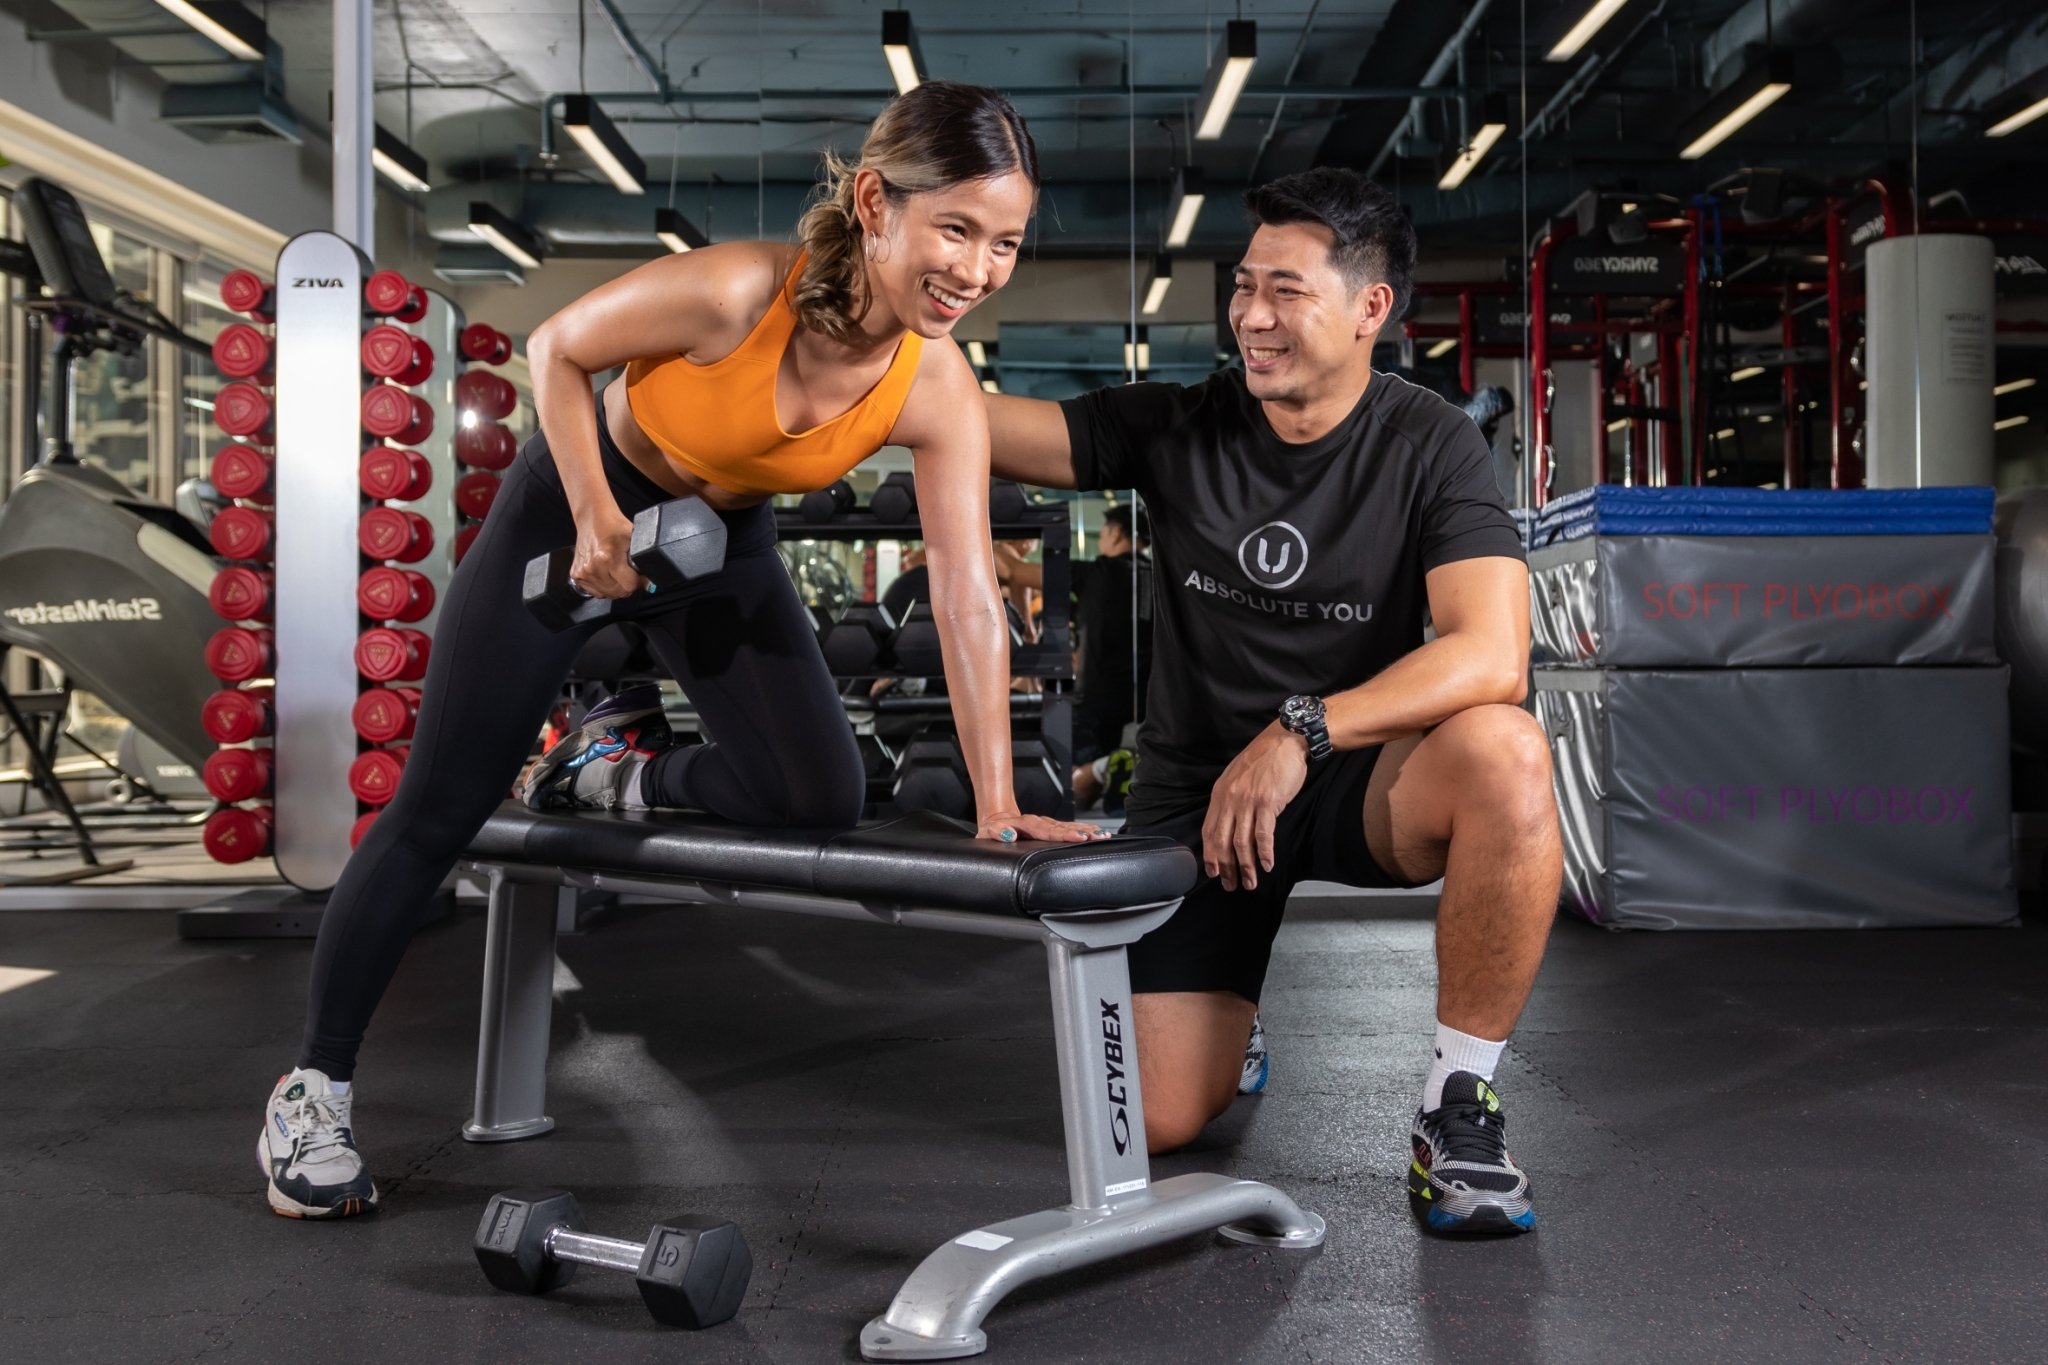 Grow With Our Private Training — Absolute Boutique Fitness (Thailand)